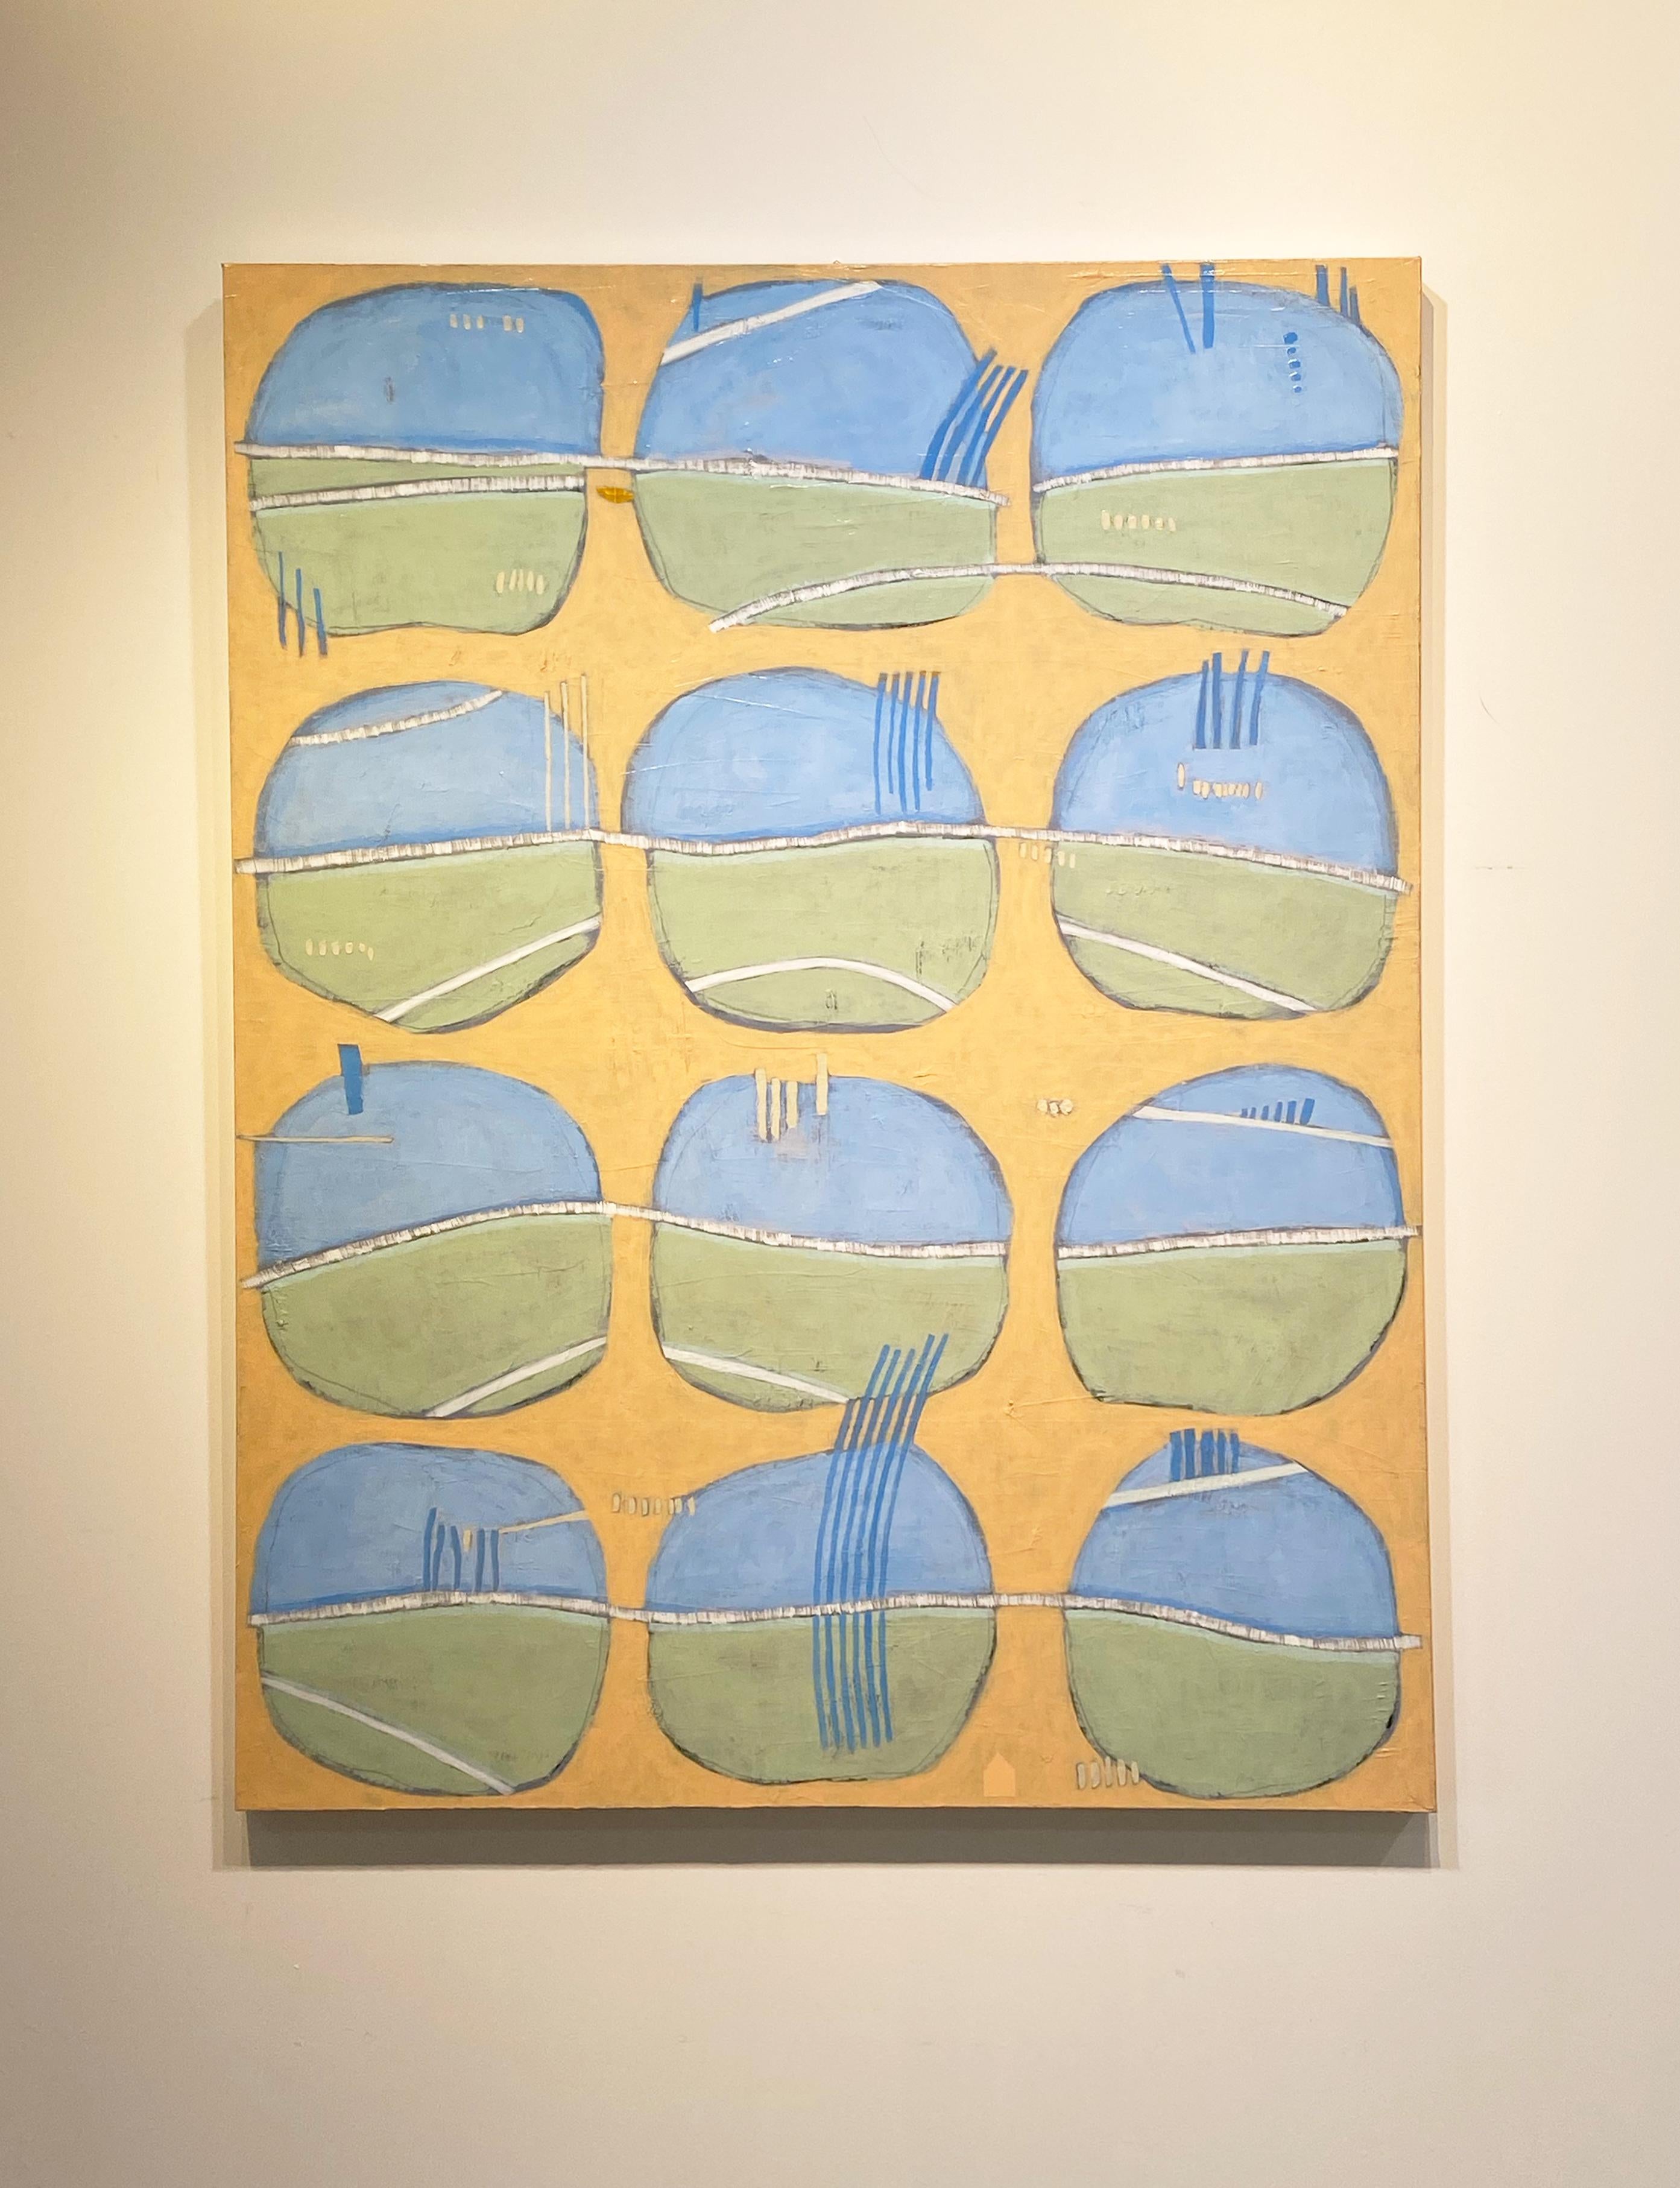 This large abstract painting by Sofie Swann is made with acrylic paint on gallery-wrapped canvas. Twelve circular shapes cover the canvas, three in each row. Each imperfect circle shape is half blue and half light green, with clusters of blue